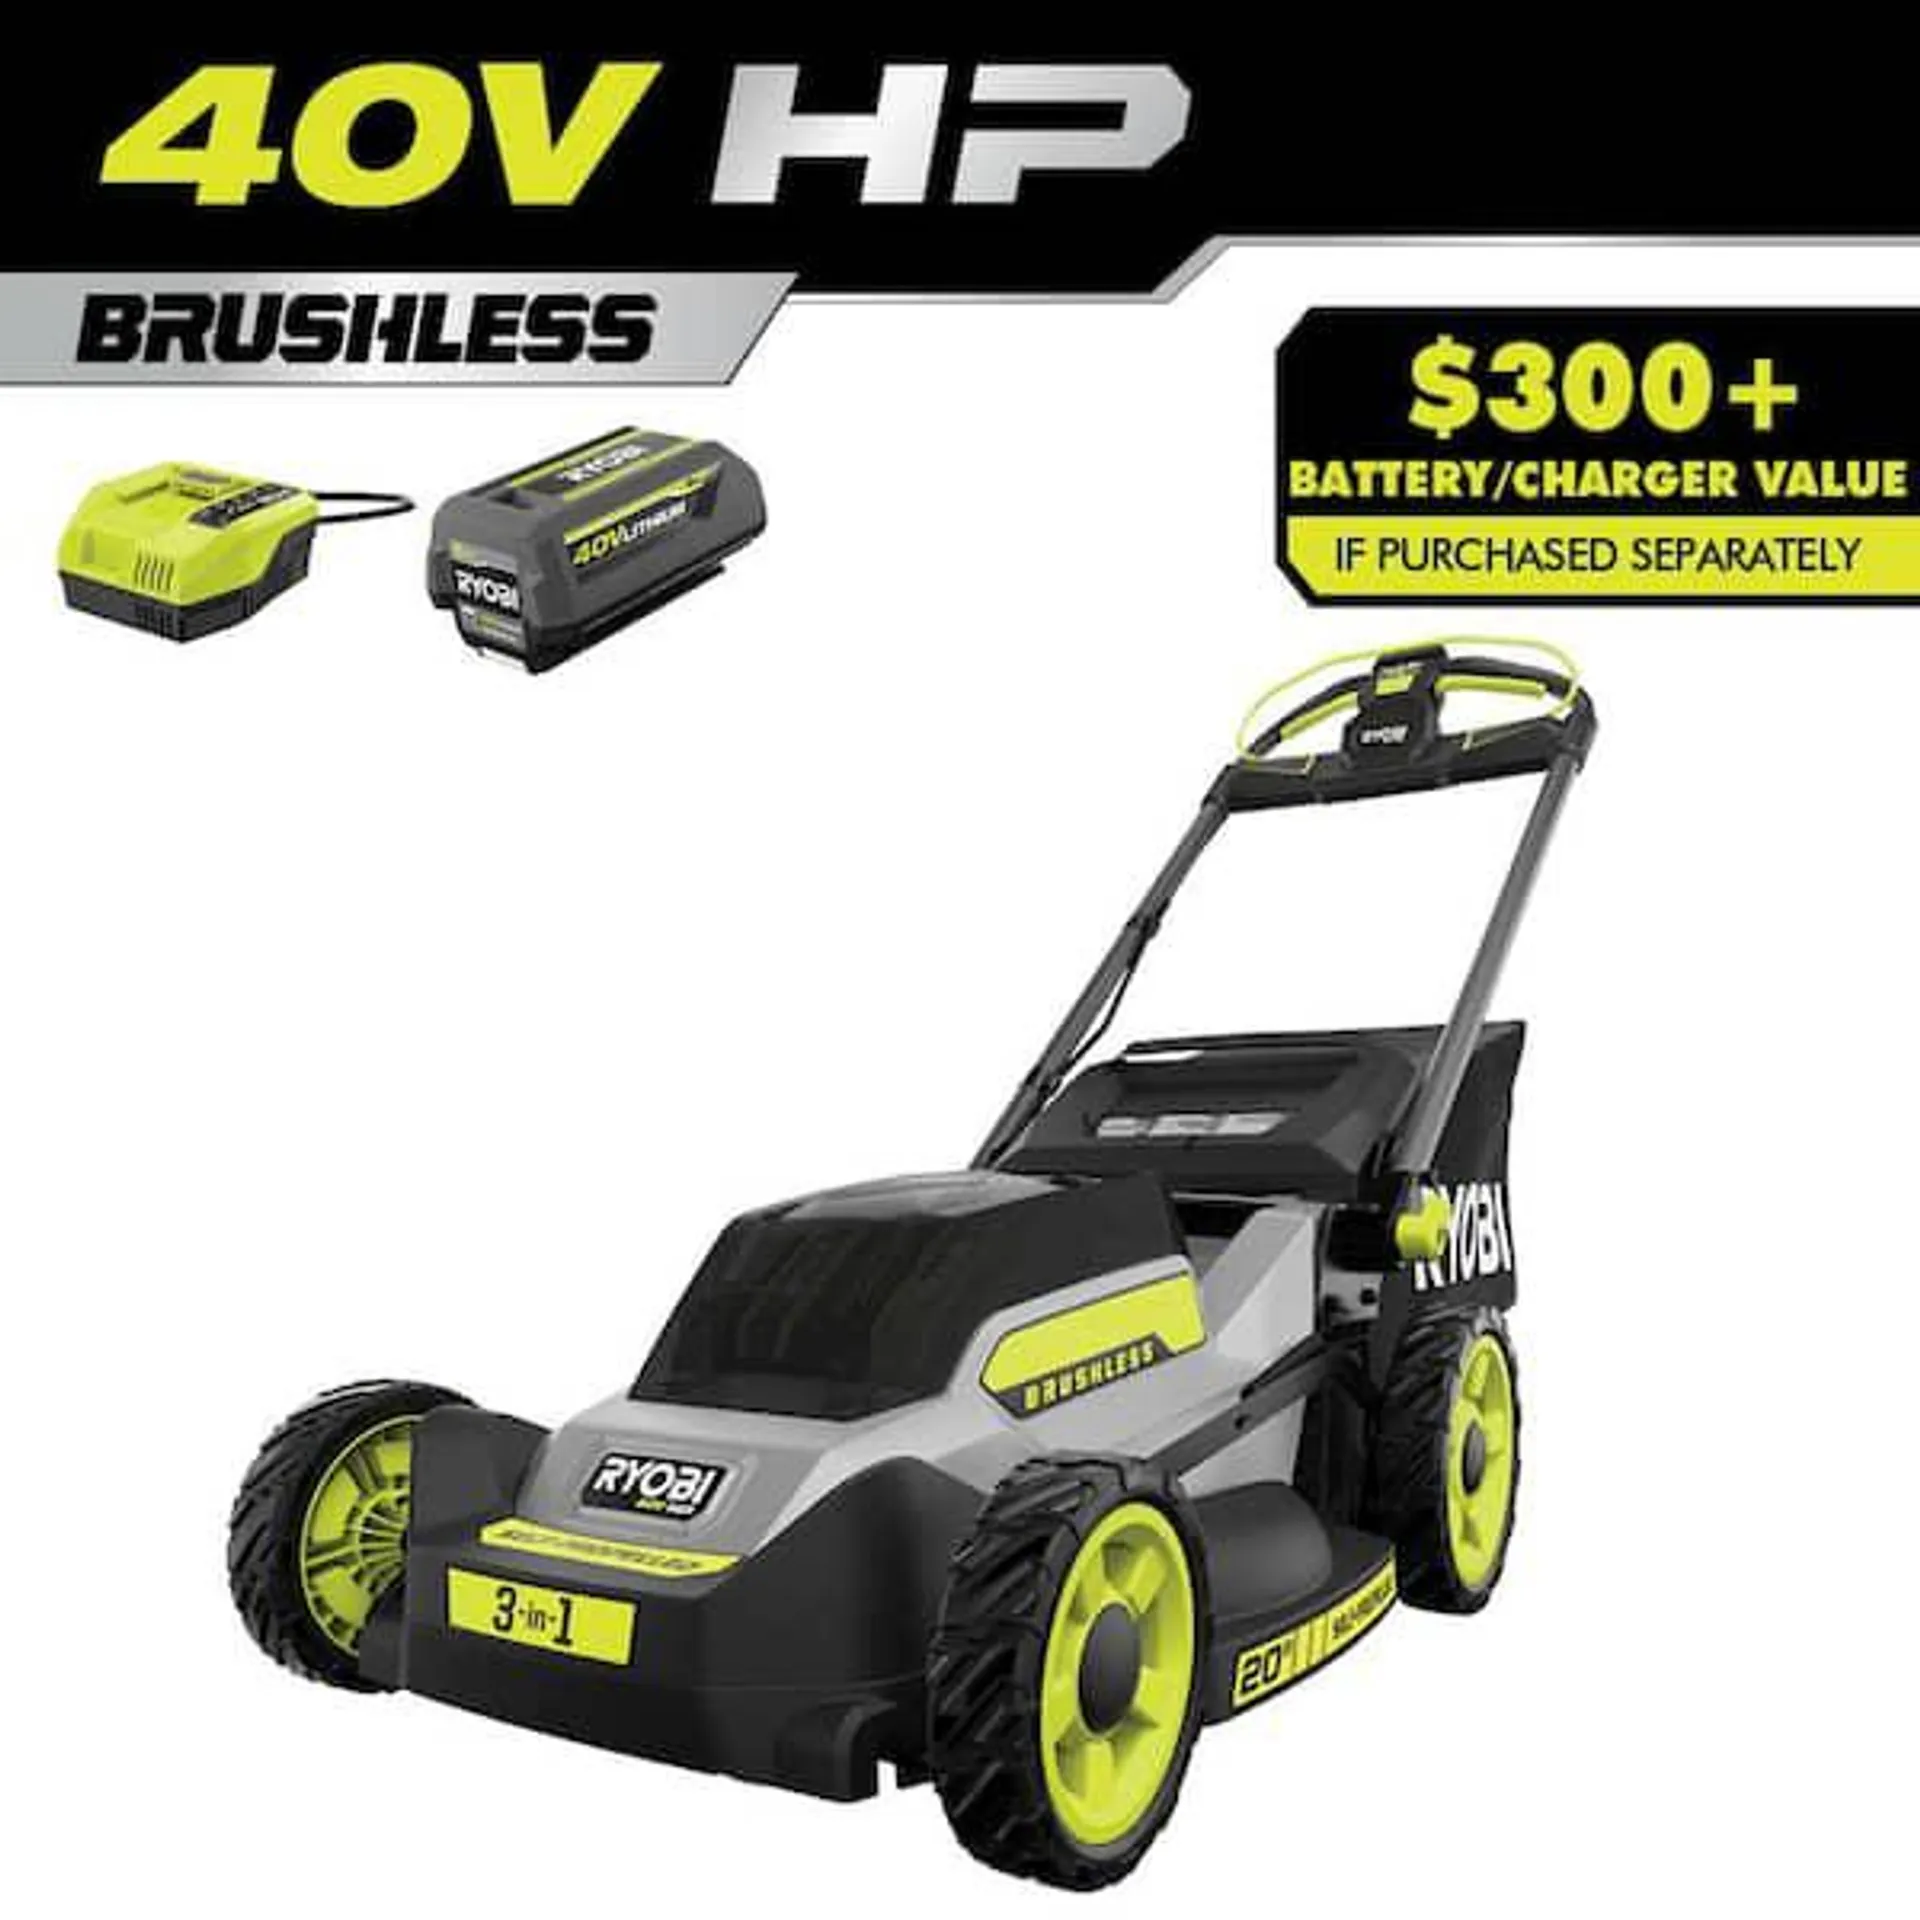 40V HP Brushless 20 in. Cordless Electric Battery Walk Behind Self-Propelled Mower with 6.0 Ah Battery and Charger